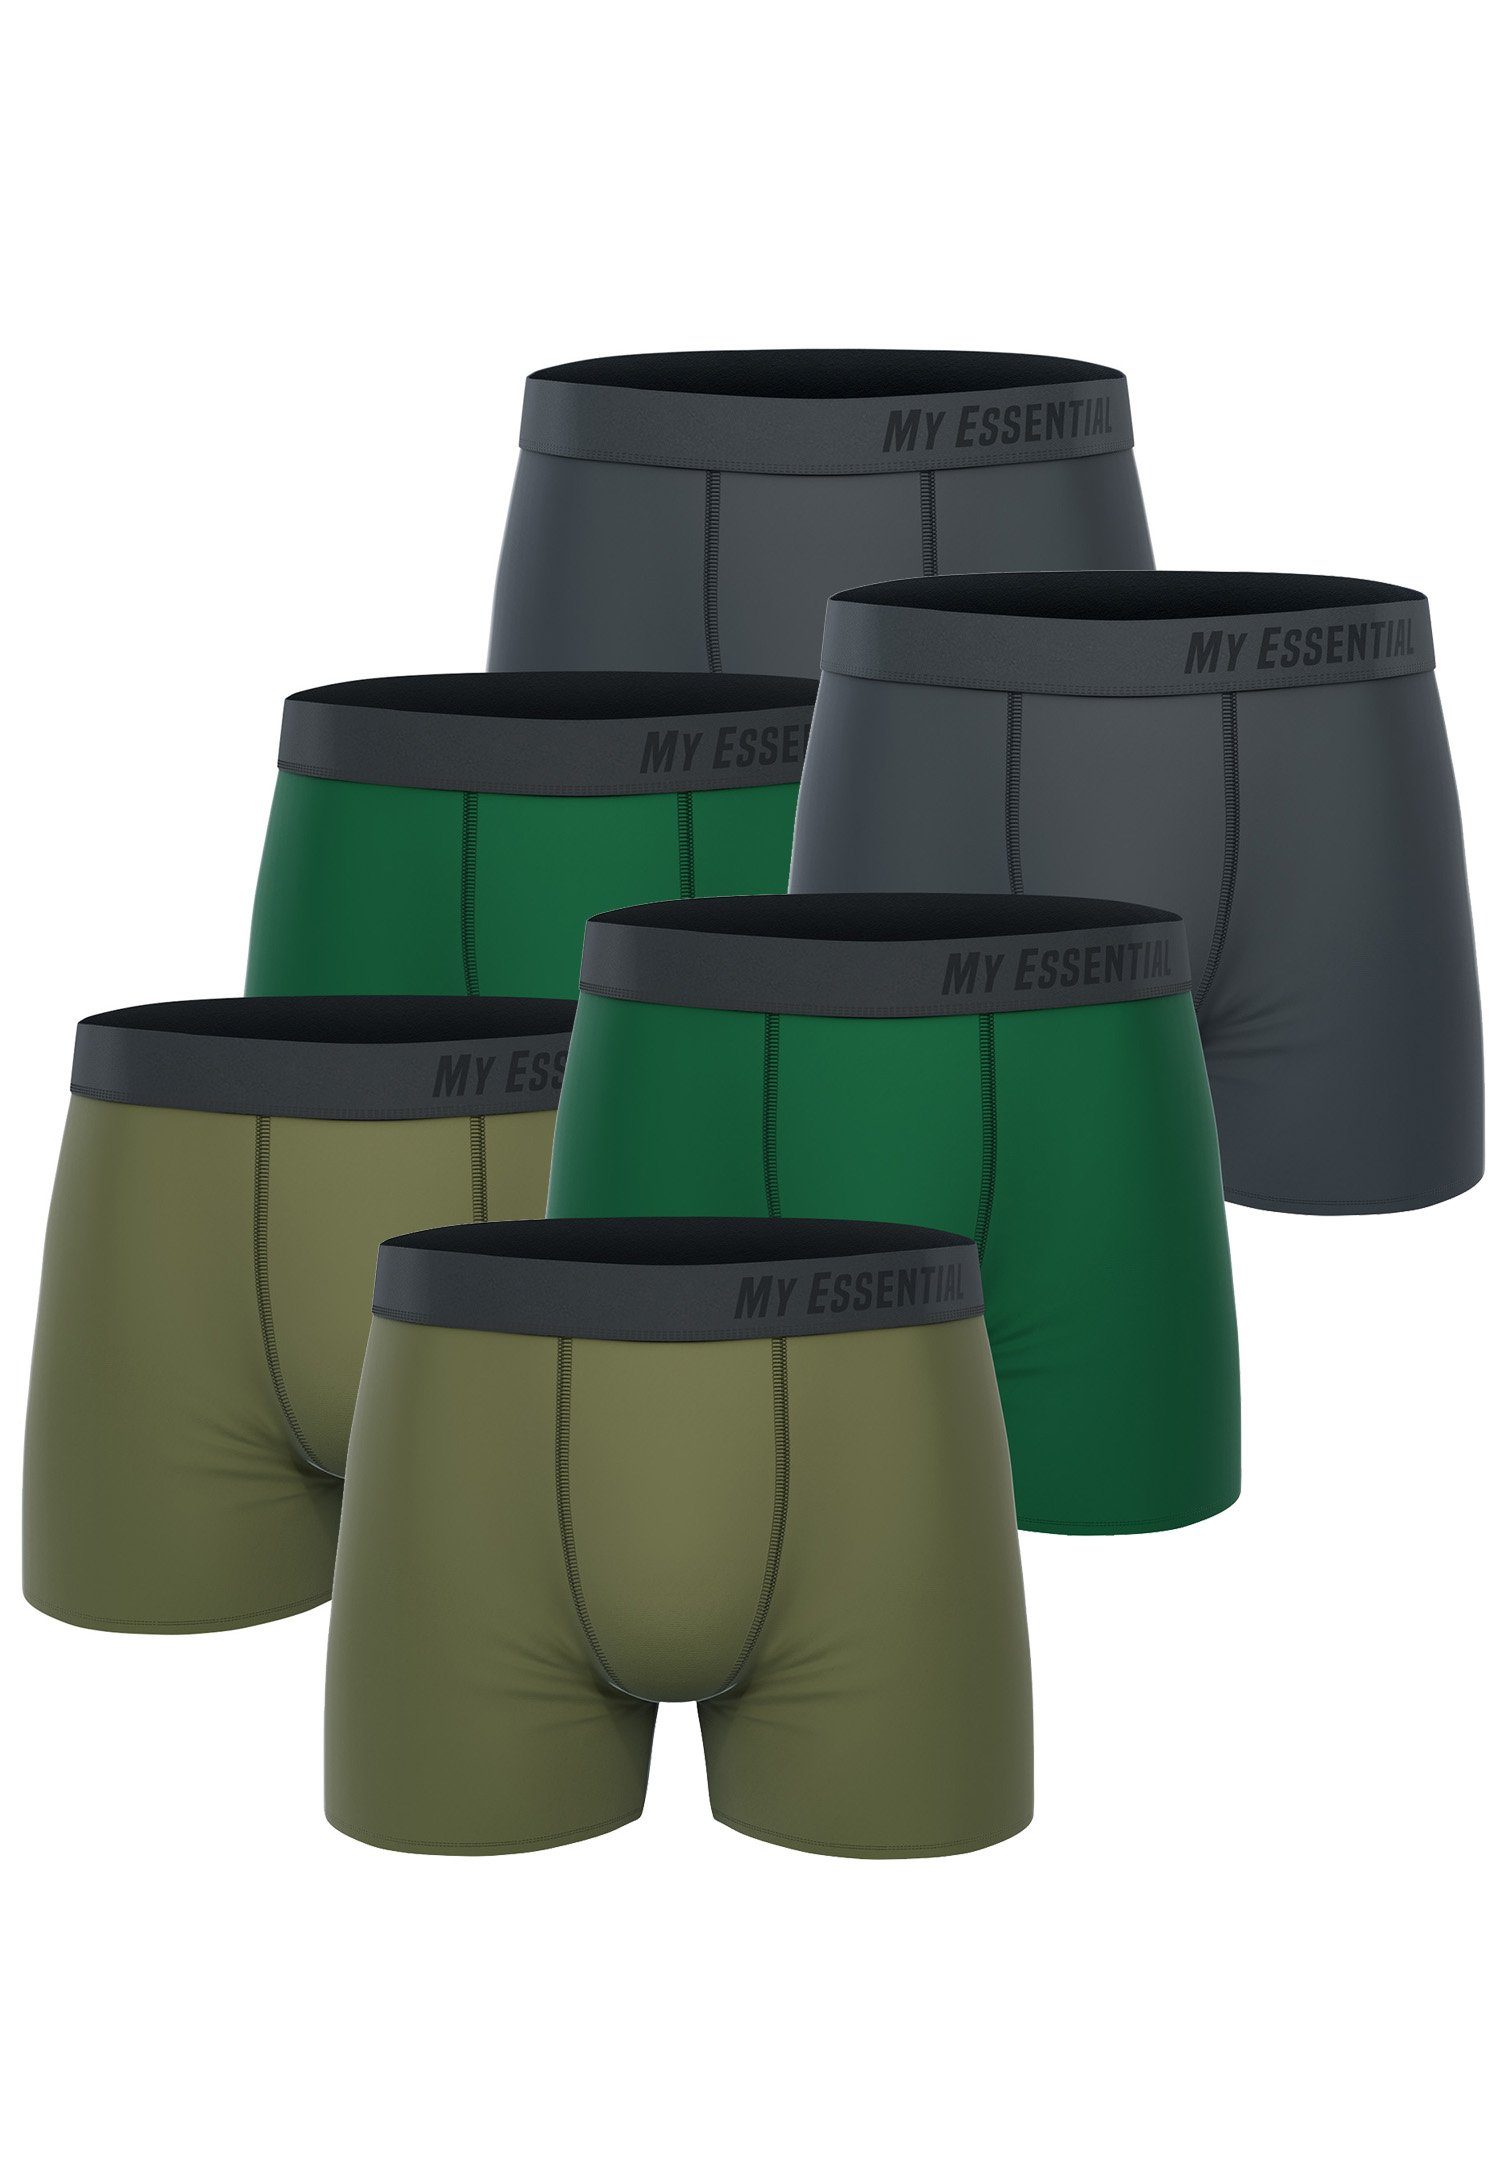 My Essential Clothing Boxershorts My Essential 6 Pack Boxers Cotton Bio (Spar-Pack, 6-St., 6er-Pack) Green